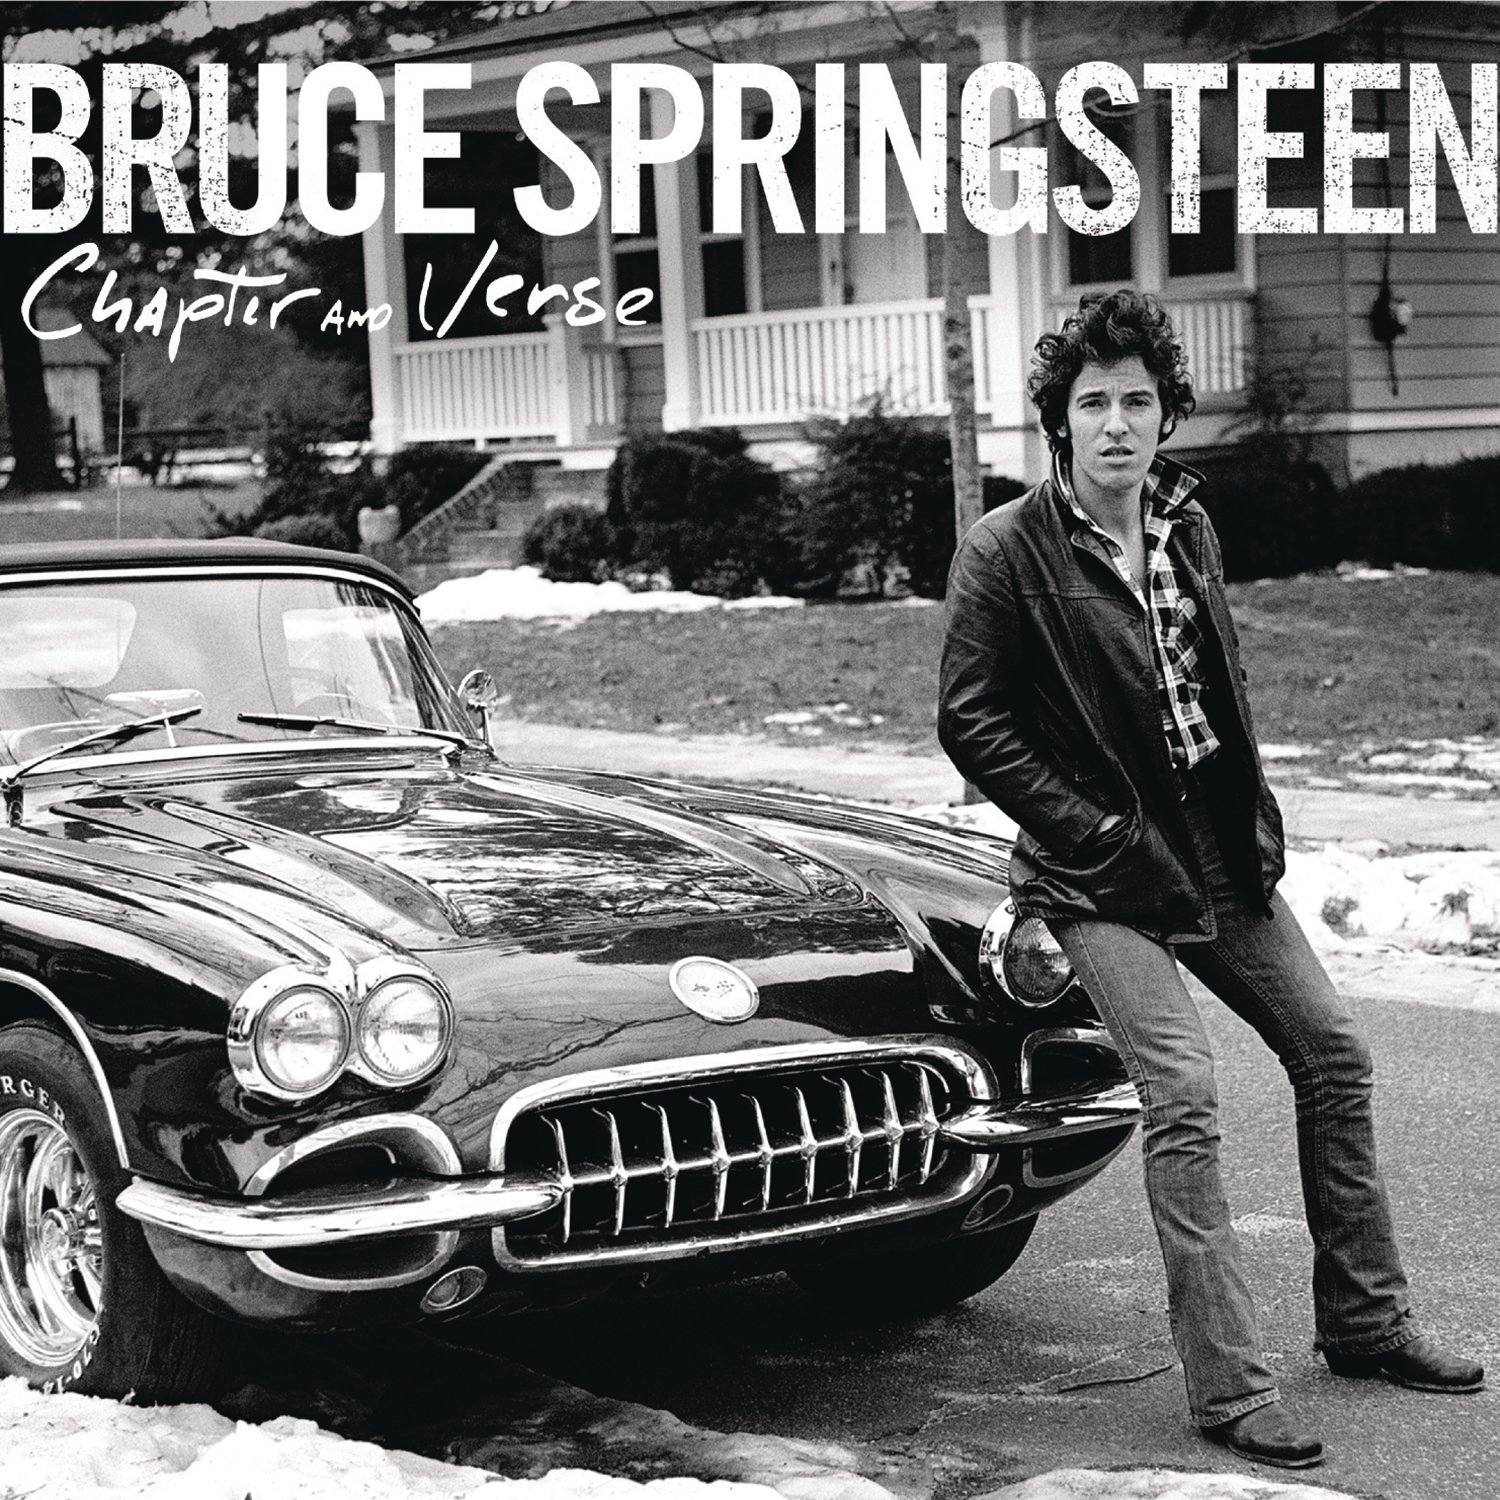 Bruce Springsteen - Chapter And Verse (2016) [HDTracks FLAC 24bit/96kHz]